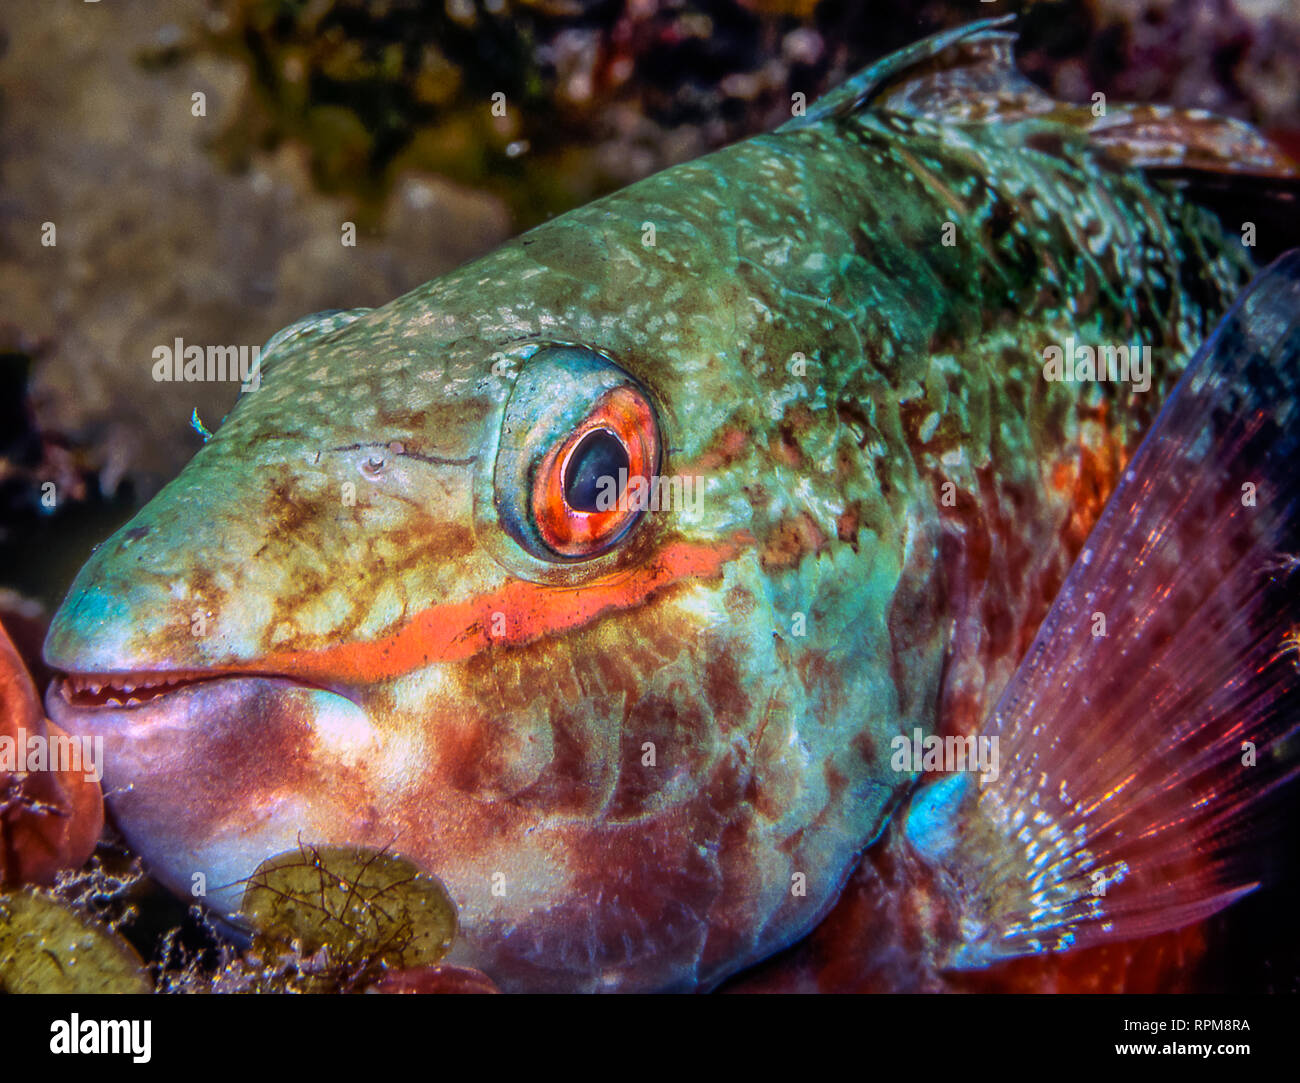 Parrotfish tropical fish found in  subtropical oceans around the world. Stock Photo